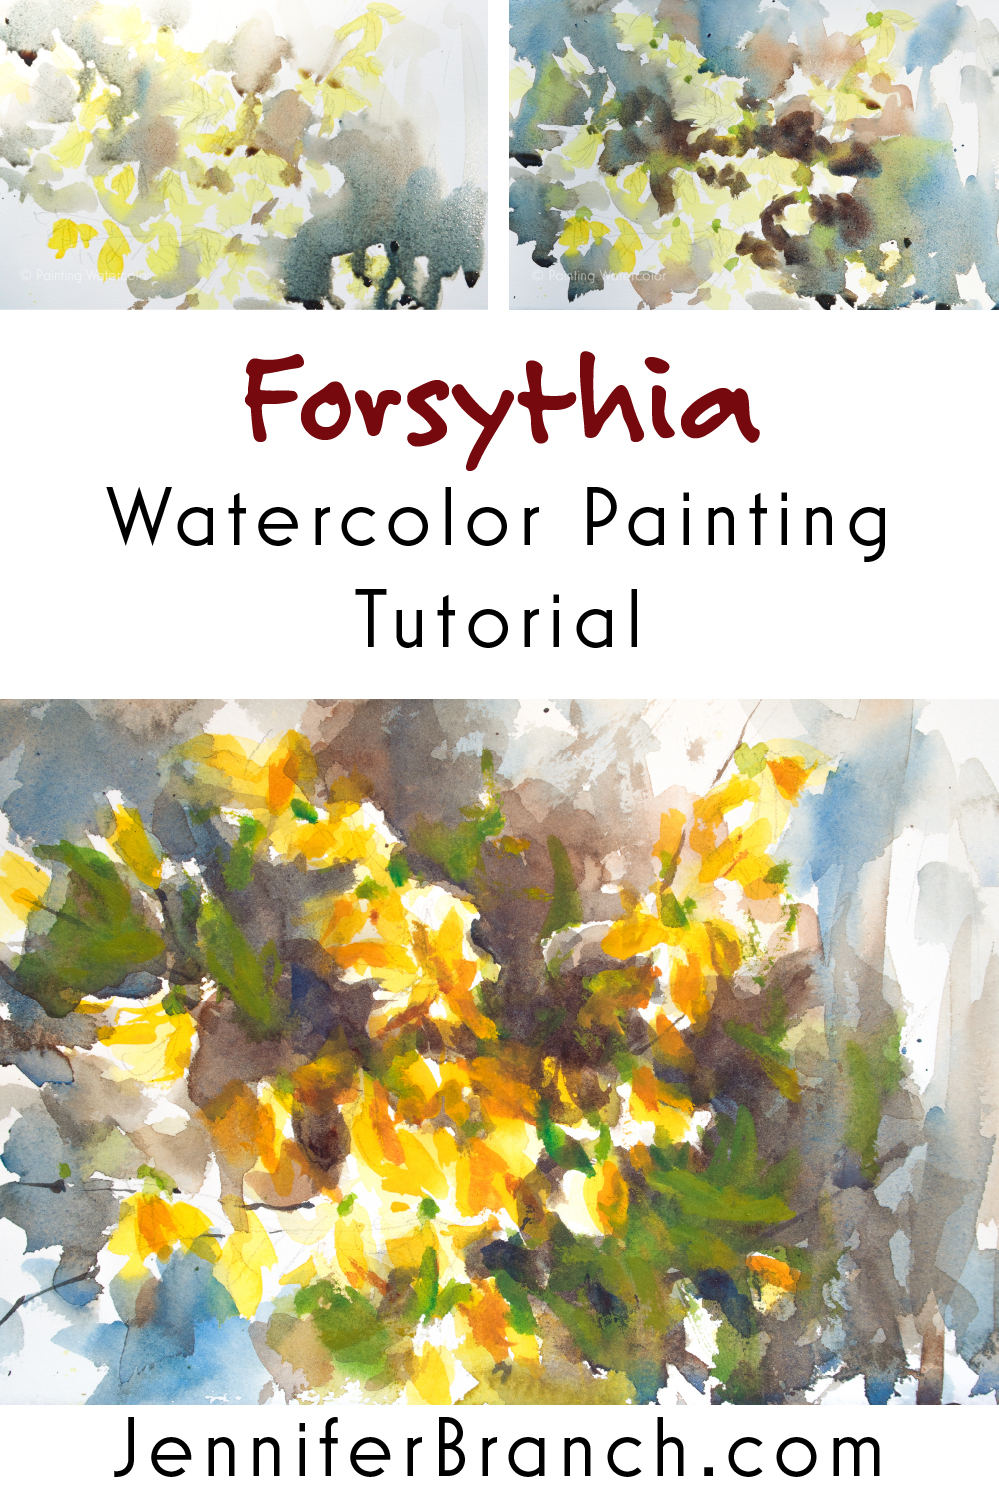 Forsythia Sketch Painting Tutorial watercolor painting tutorial by Jennifer Branch